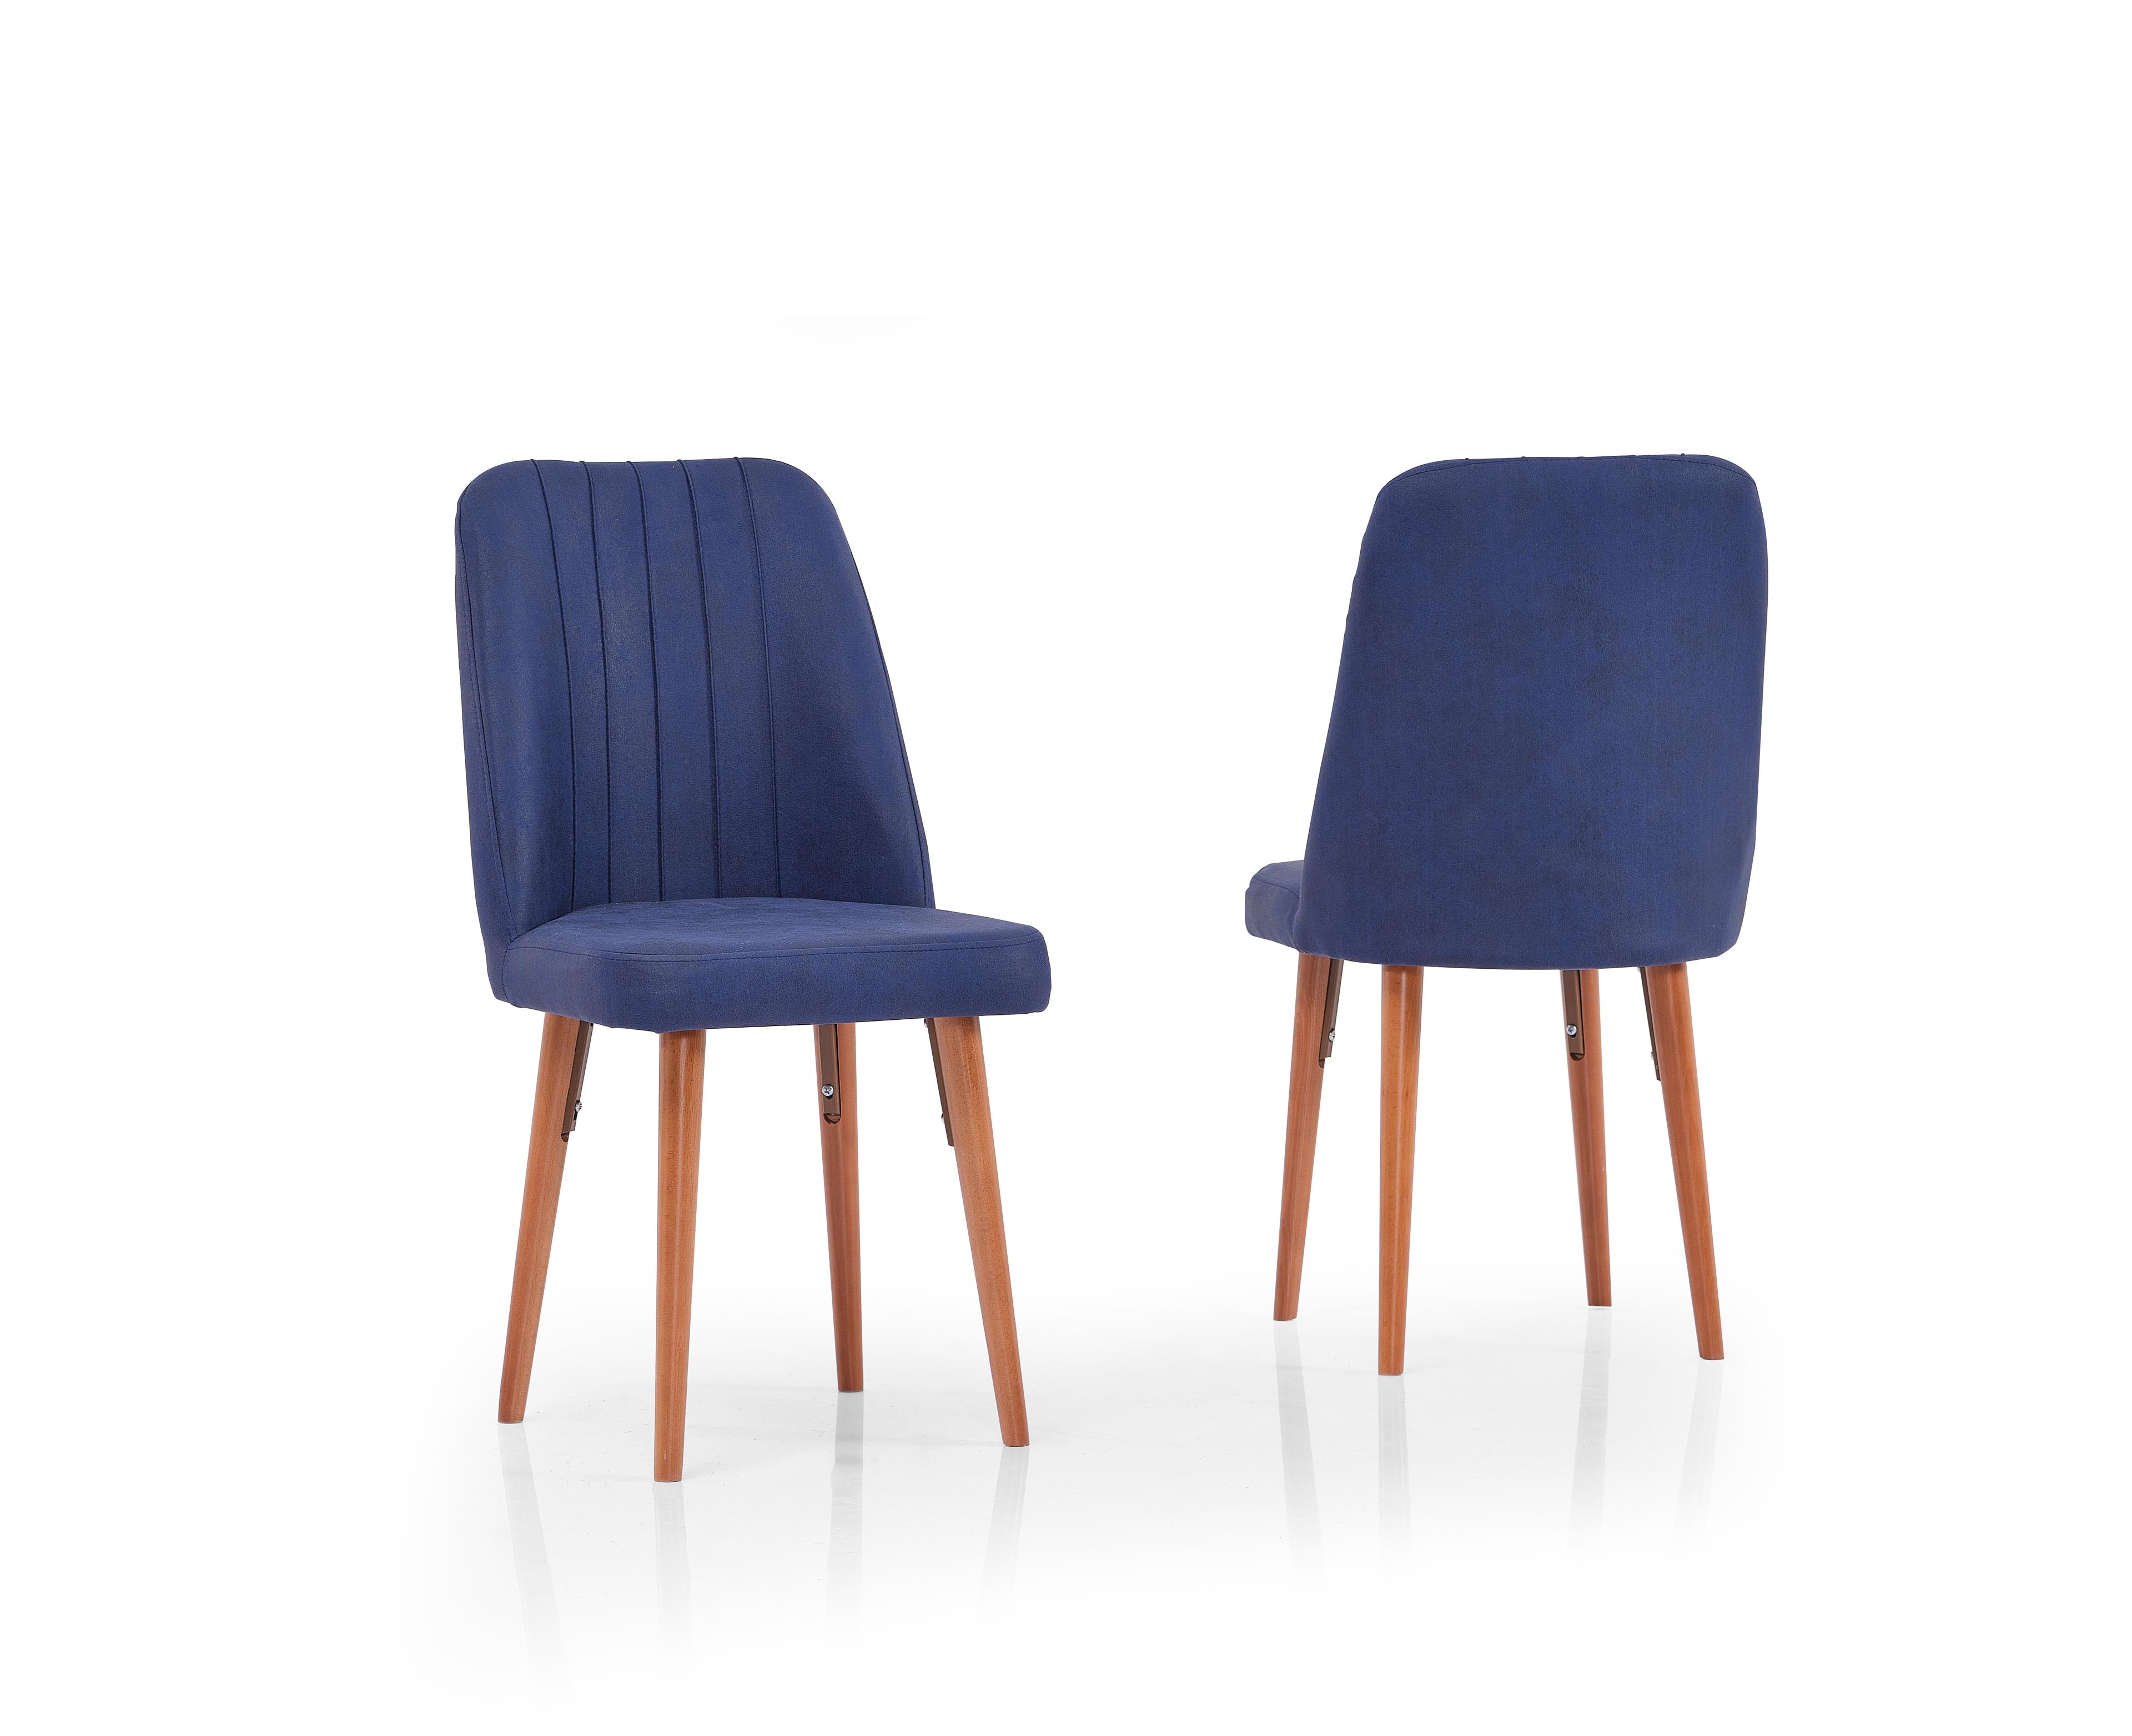 Olesivo Square Gold Chair - Navy Blue